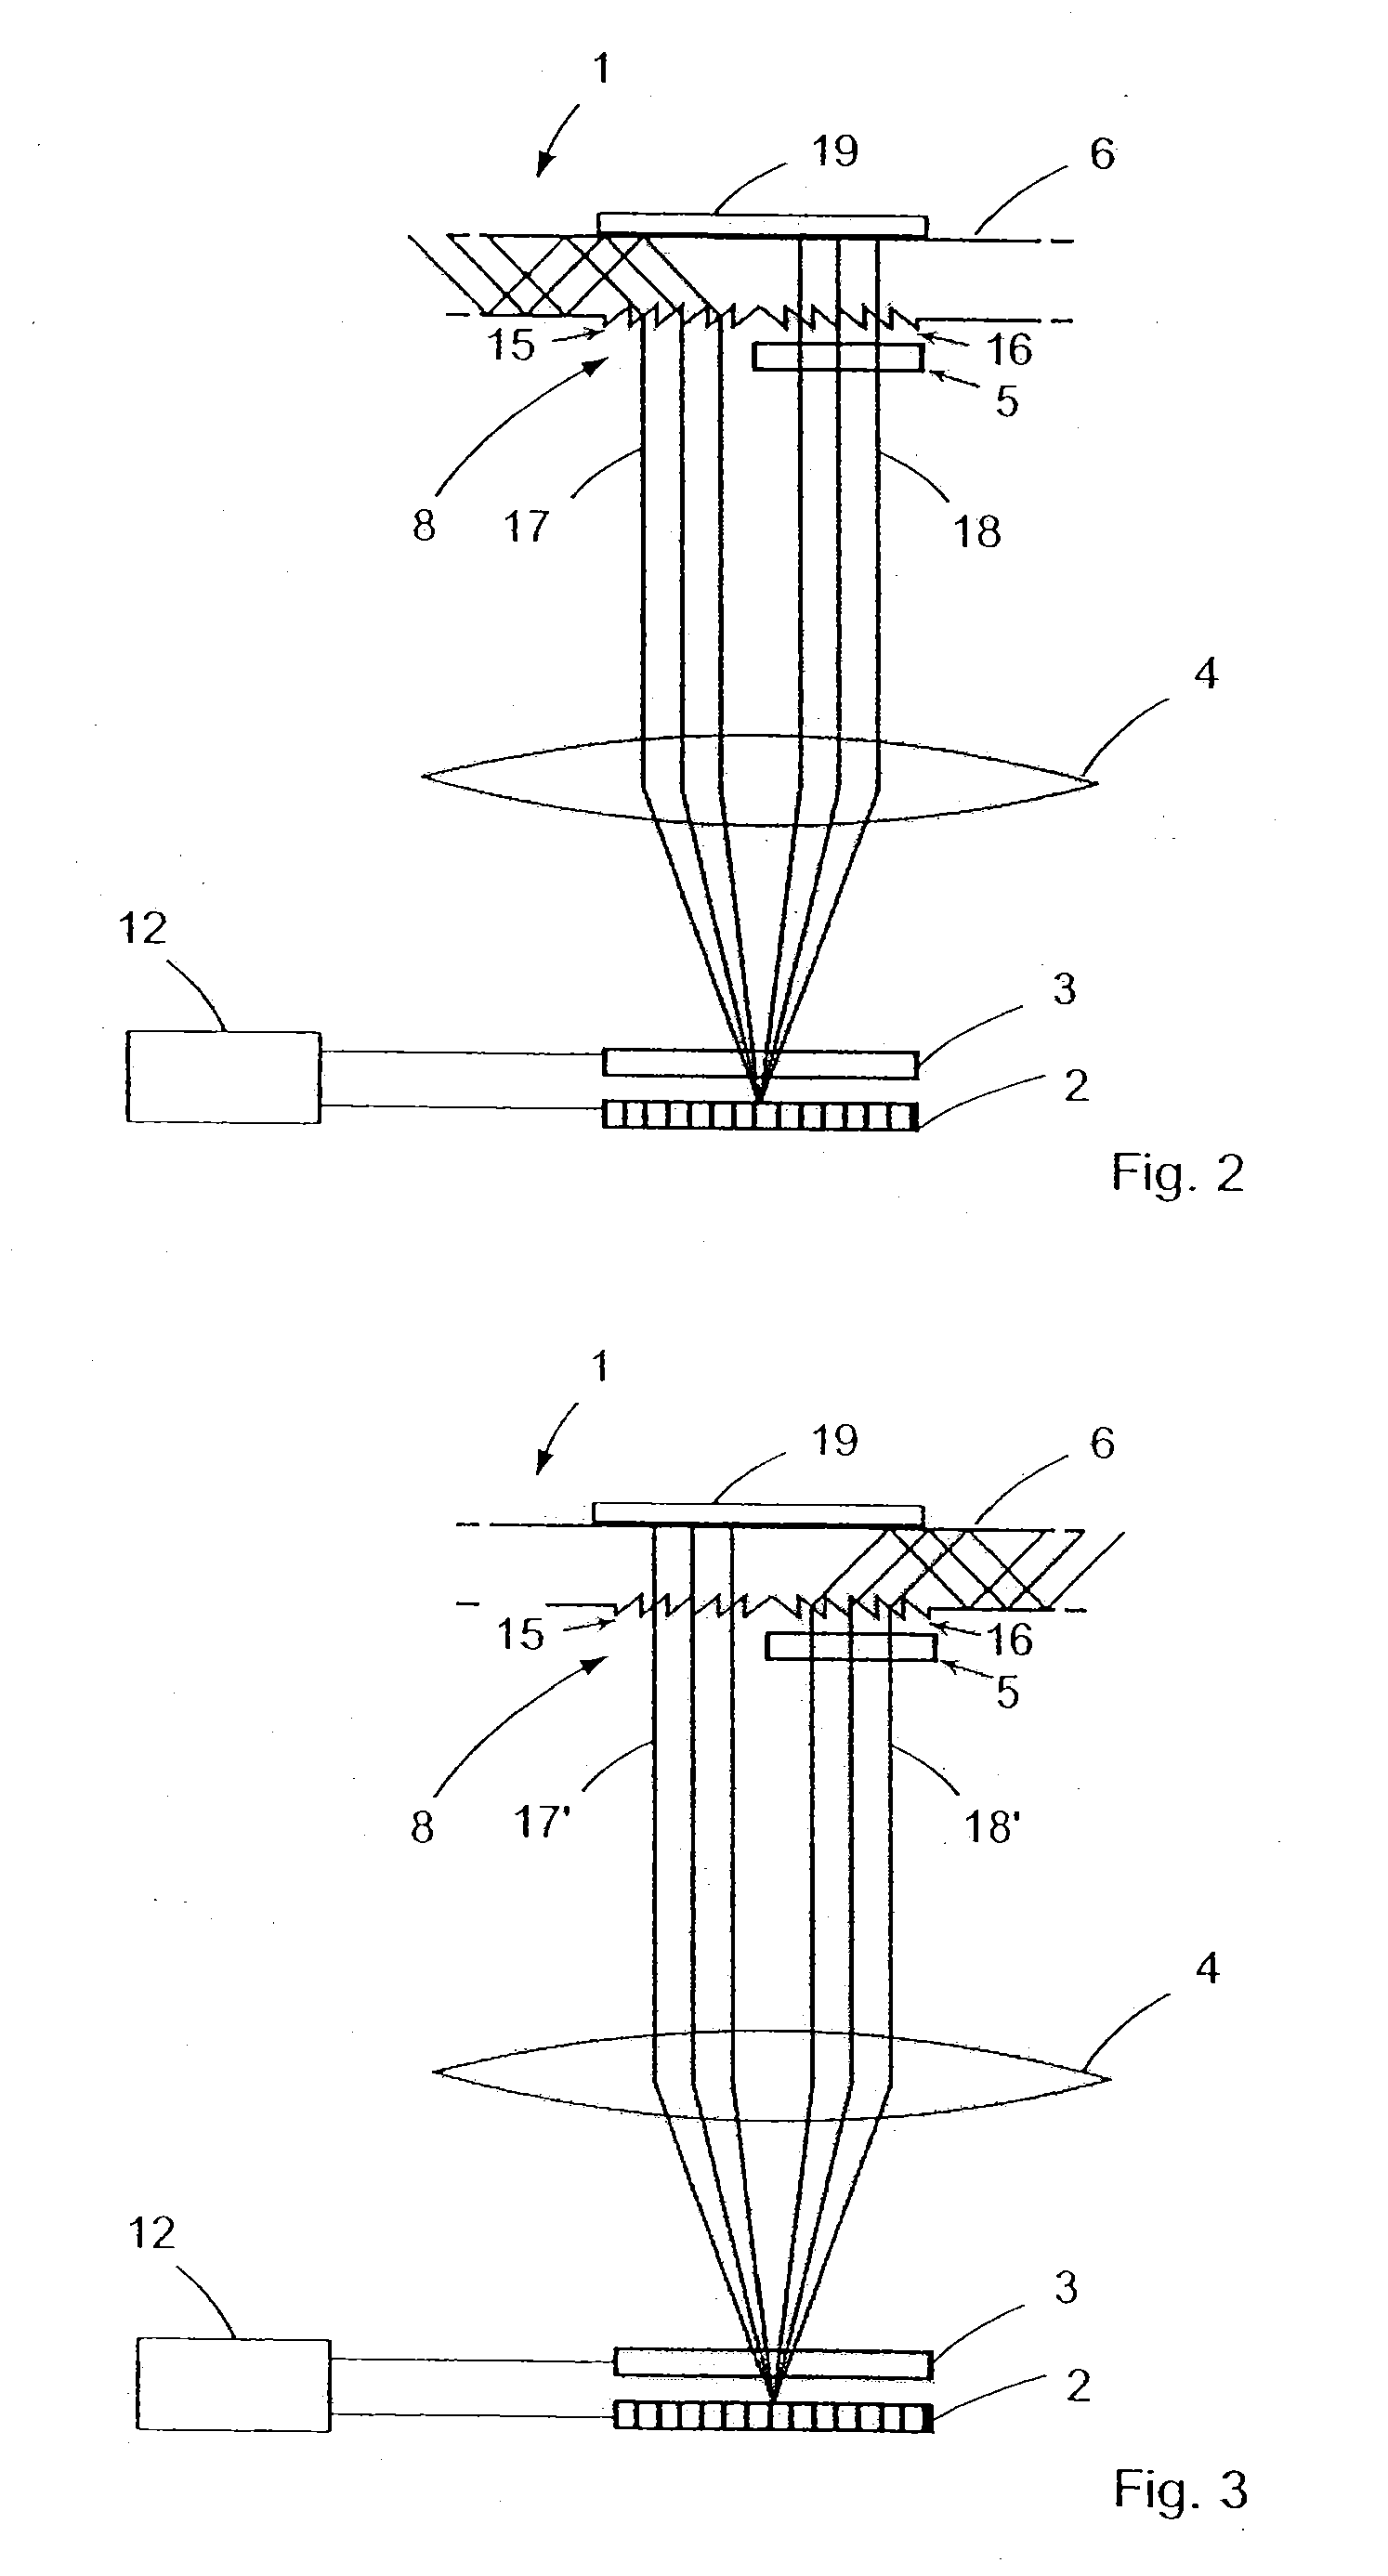 Display unit, and displaying method for the binocular representation of a multicolor image